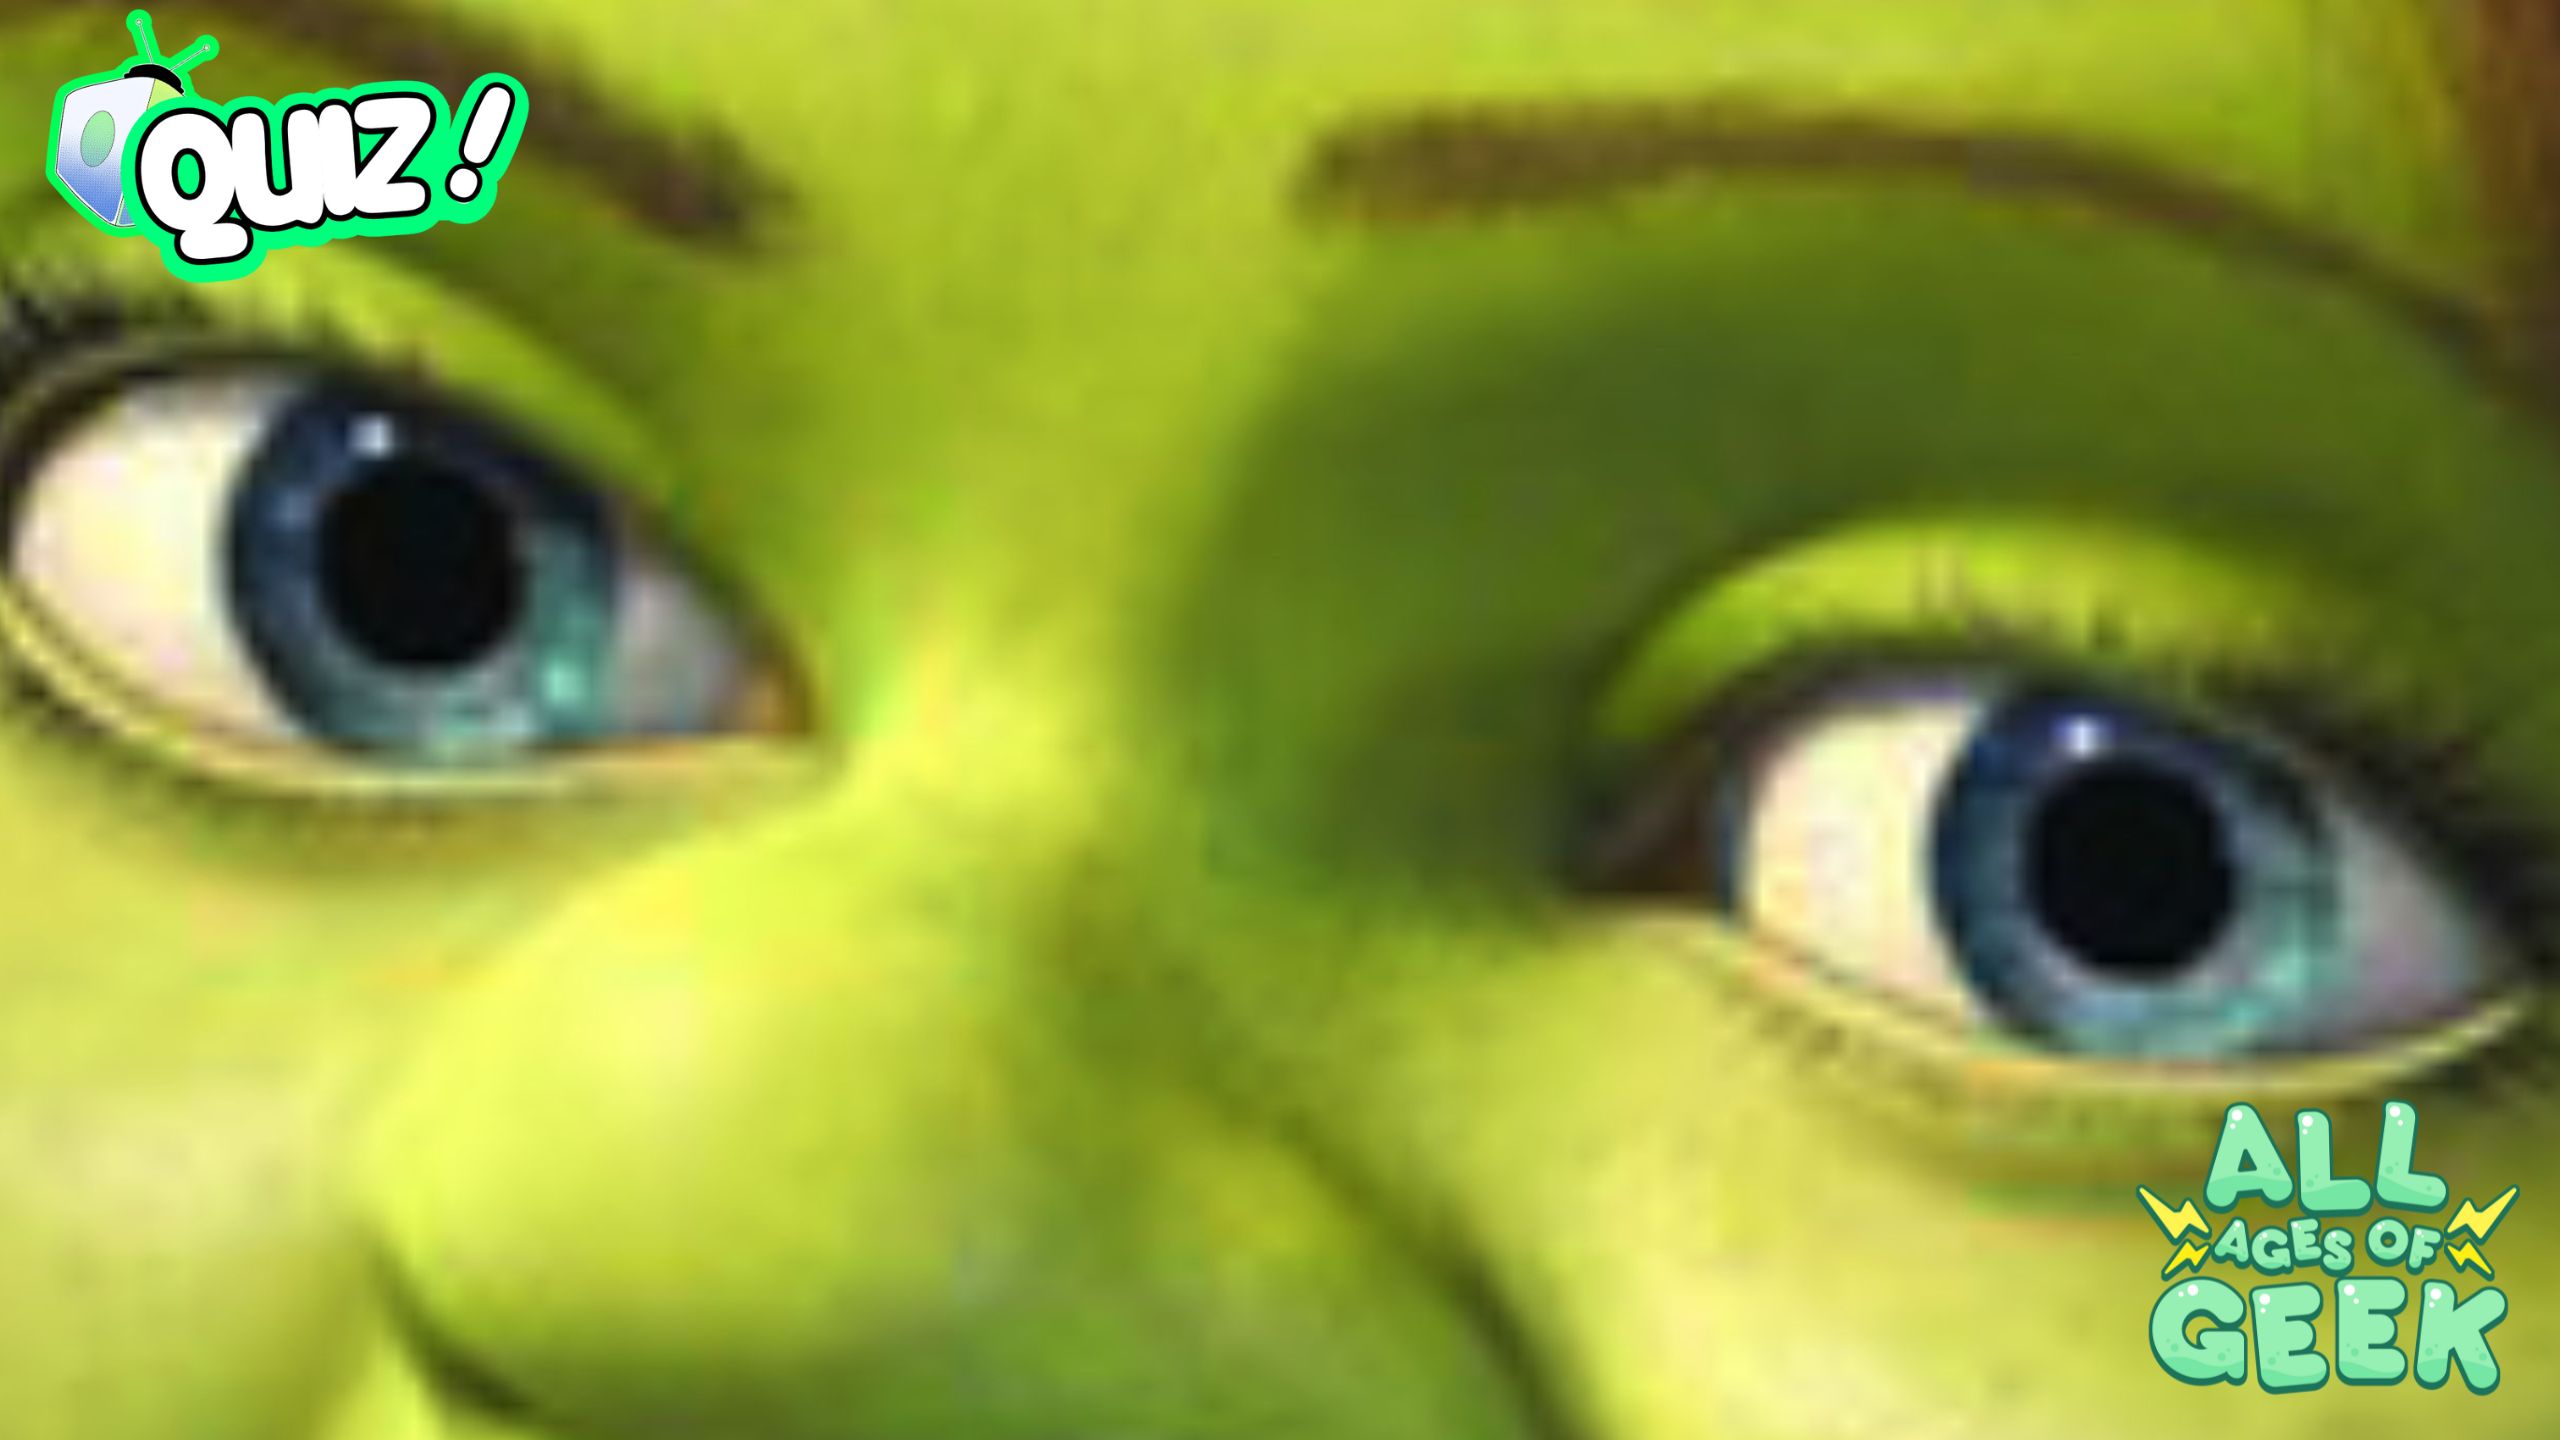 Which Fiona “Shrek” Body Part Are You? Take the Quiz!